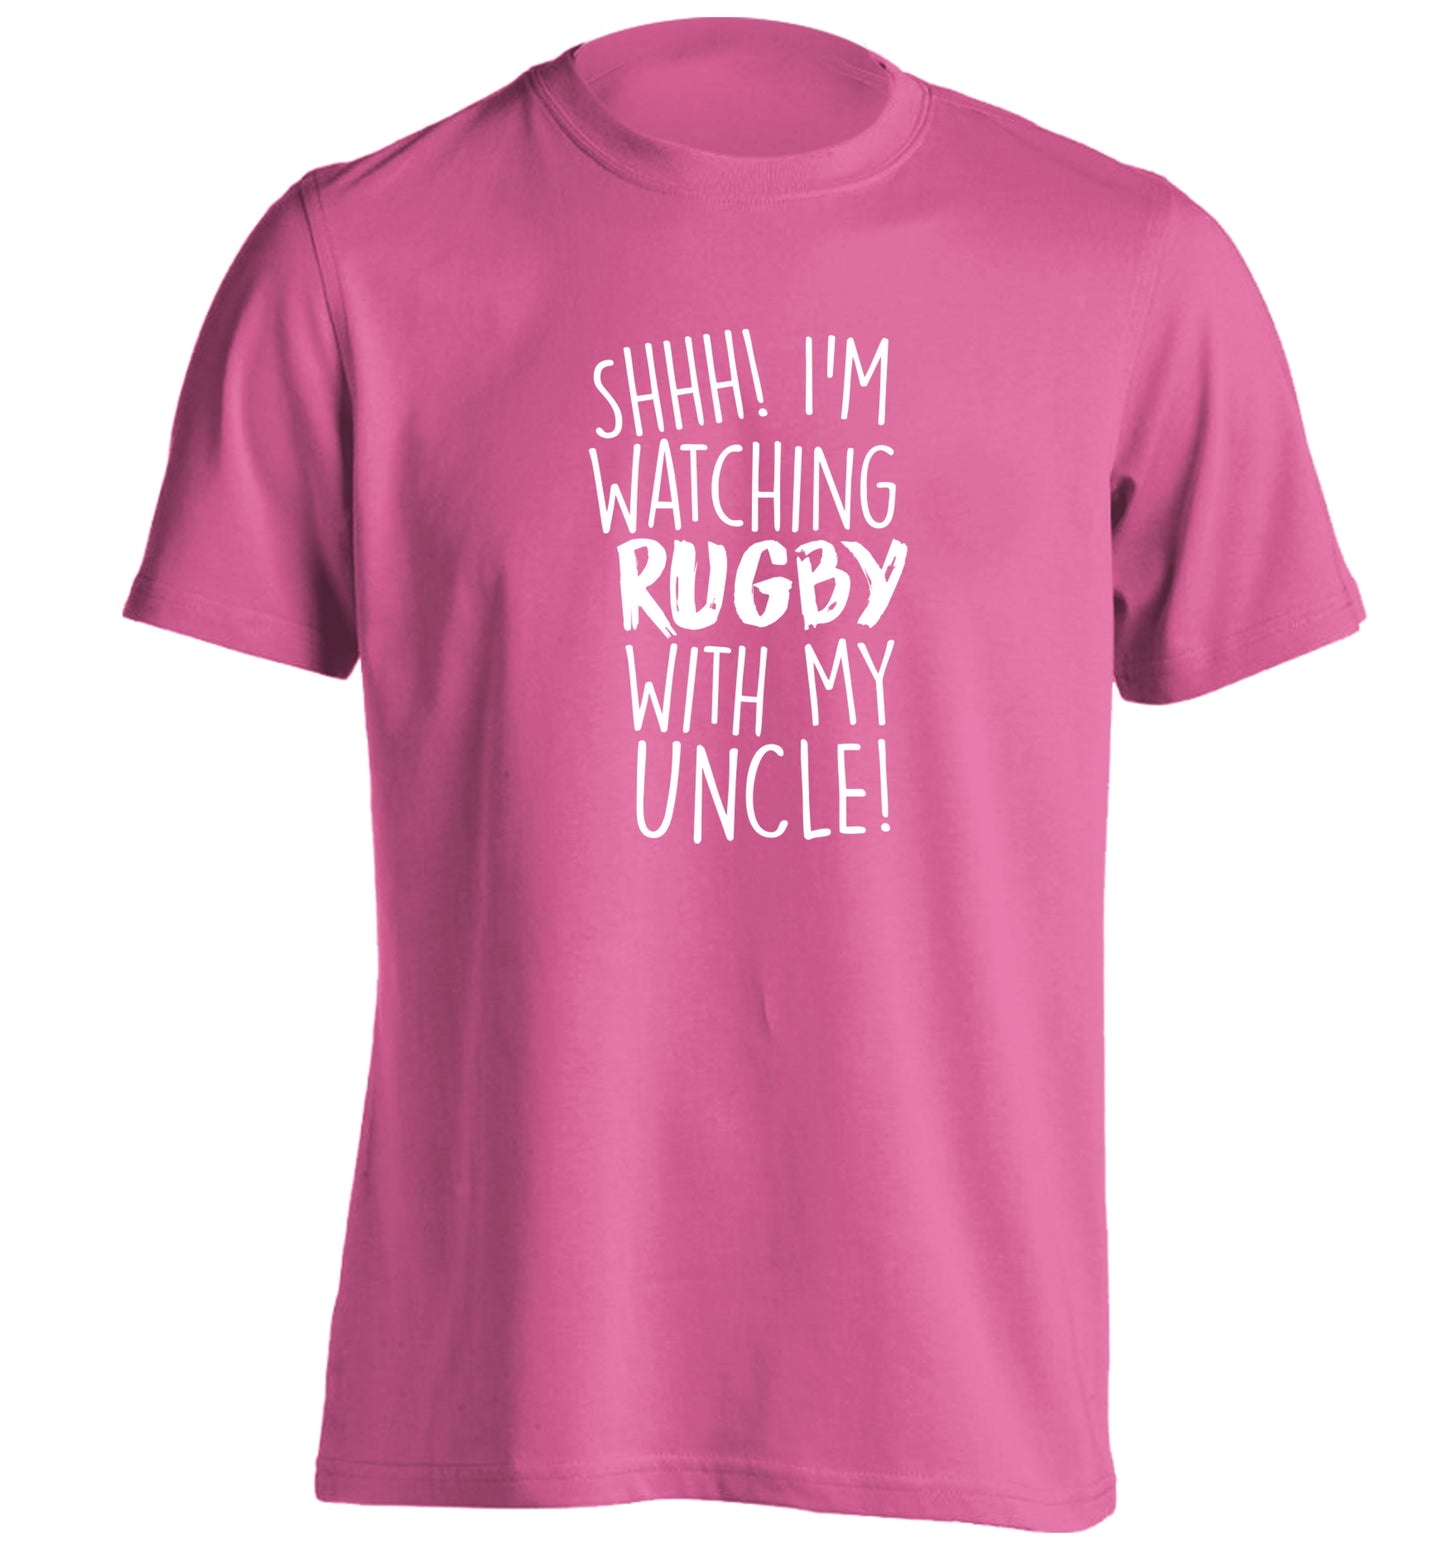 Shh.. I'm watching rugby with my uncle adults unisex pink Tshirt 2XL